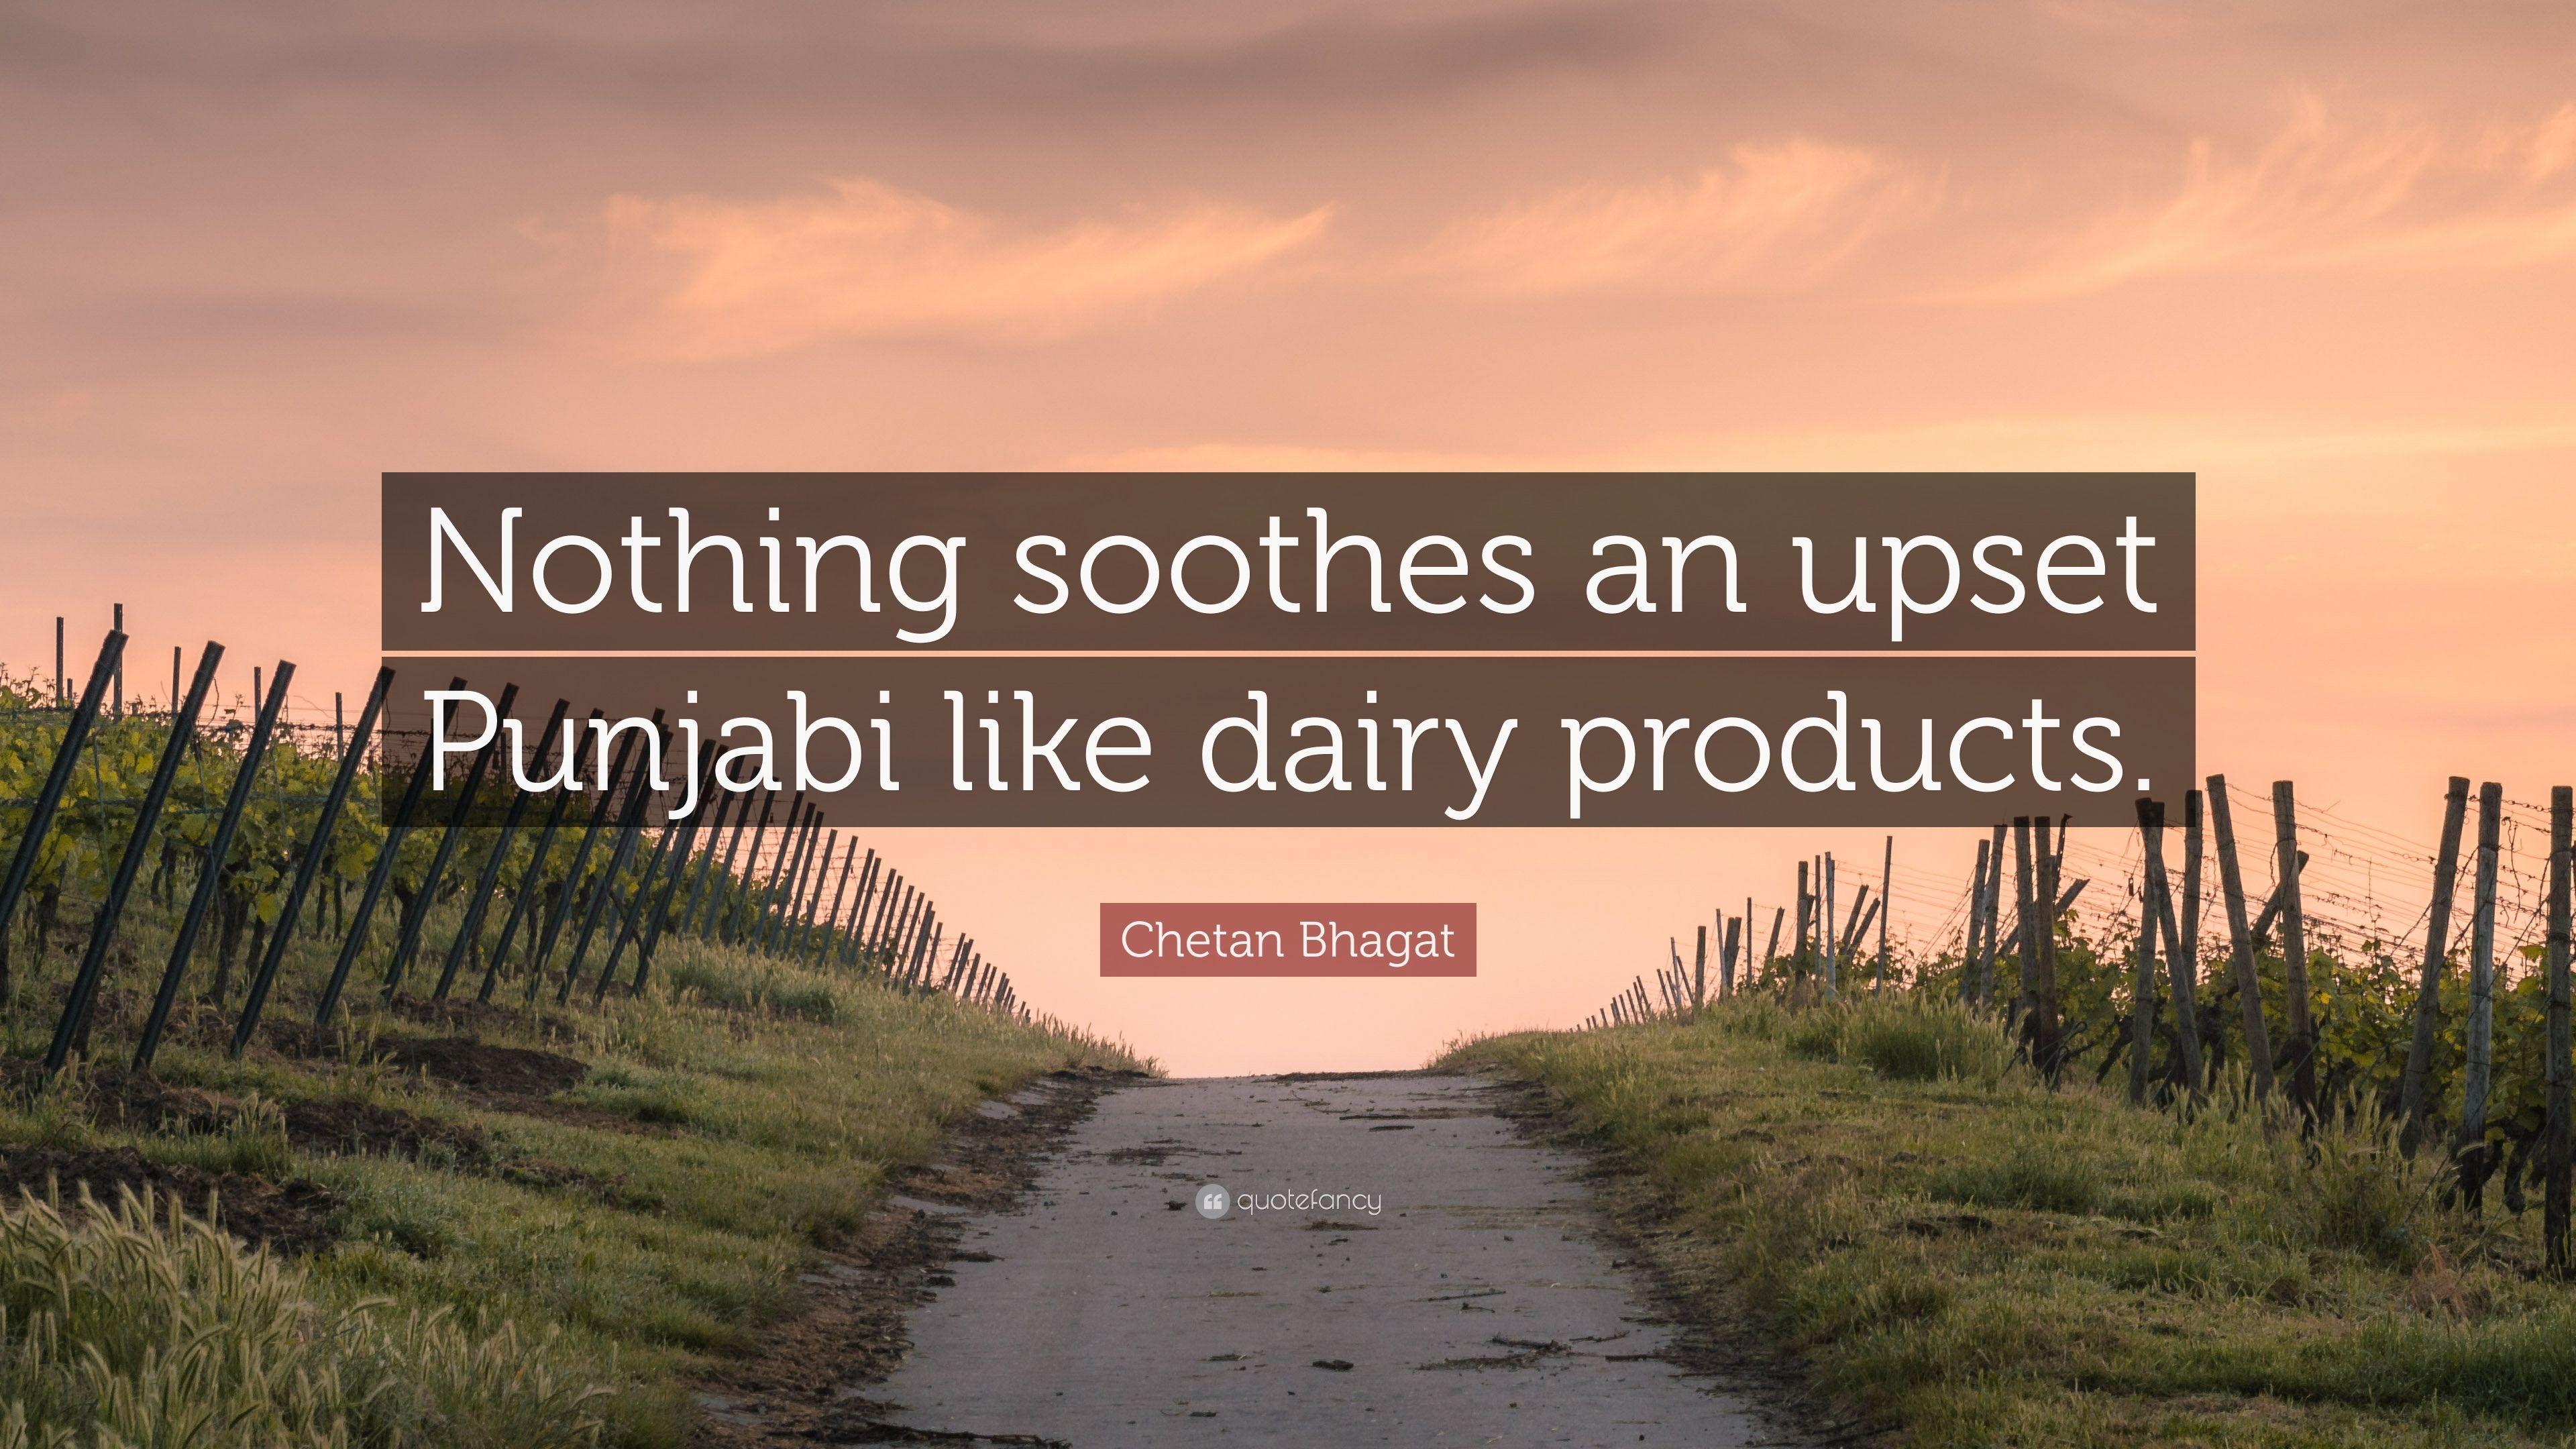 Chetan Bhagat Quote: “Nothing soothes an upset Punjabi like dairy